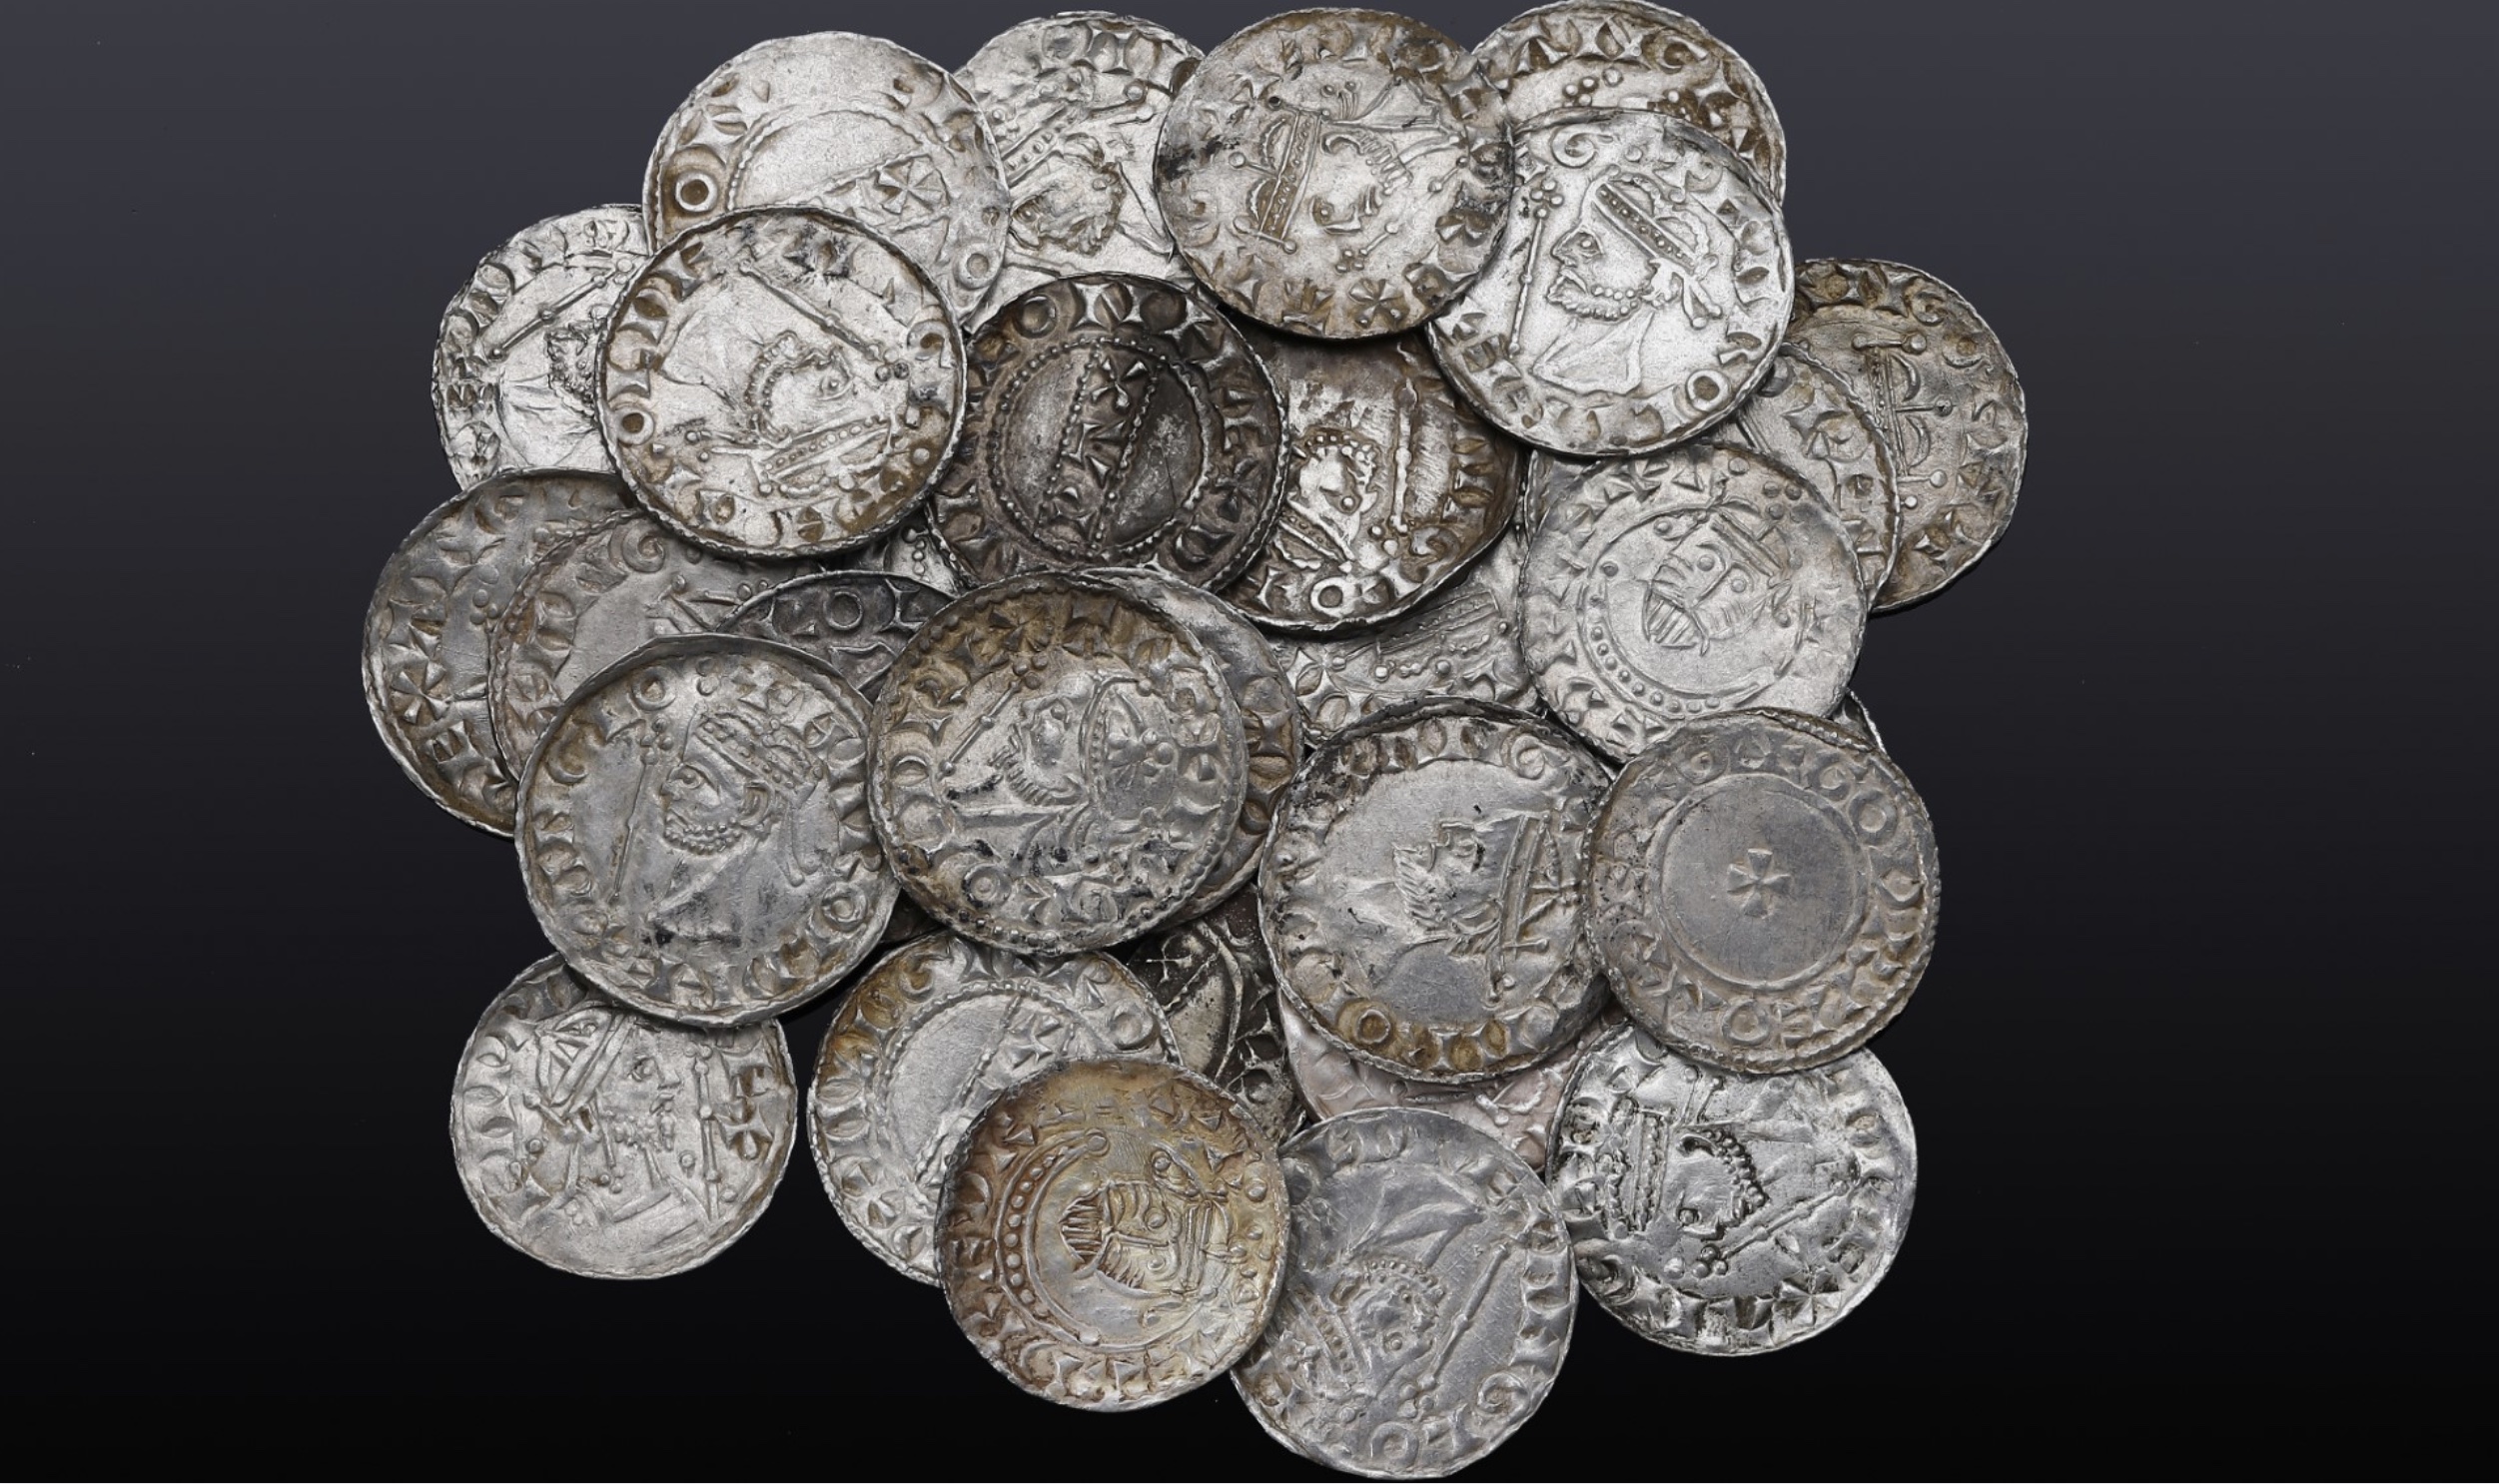 Braintree hoard hammers at over £325K – Antique Collecting